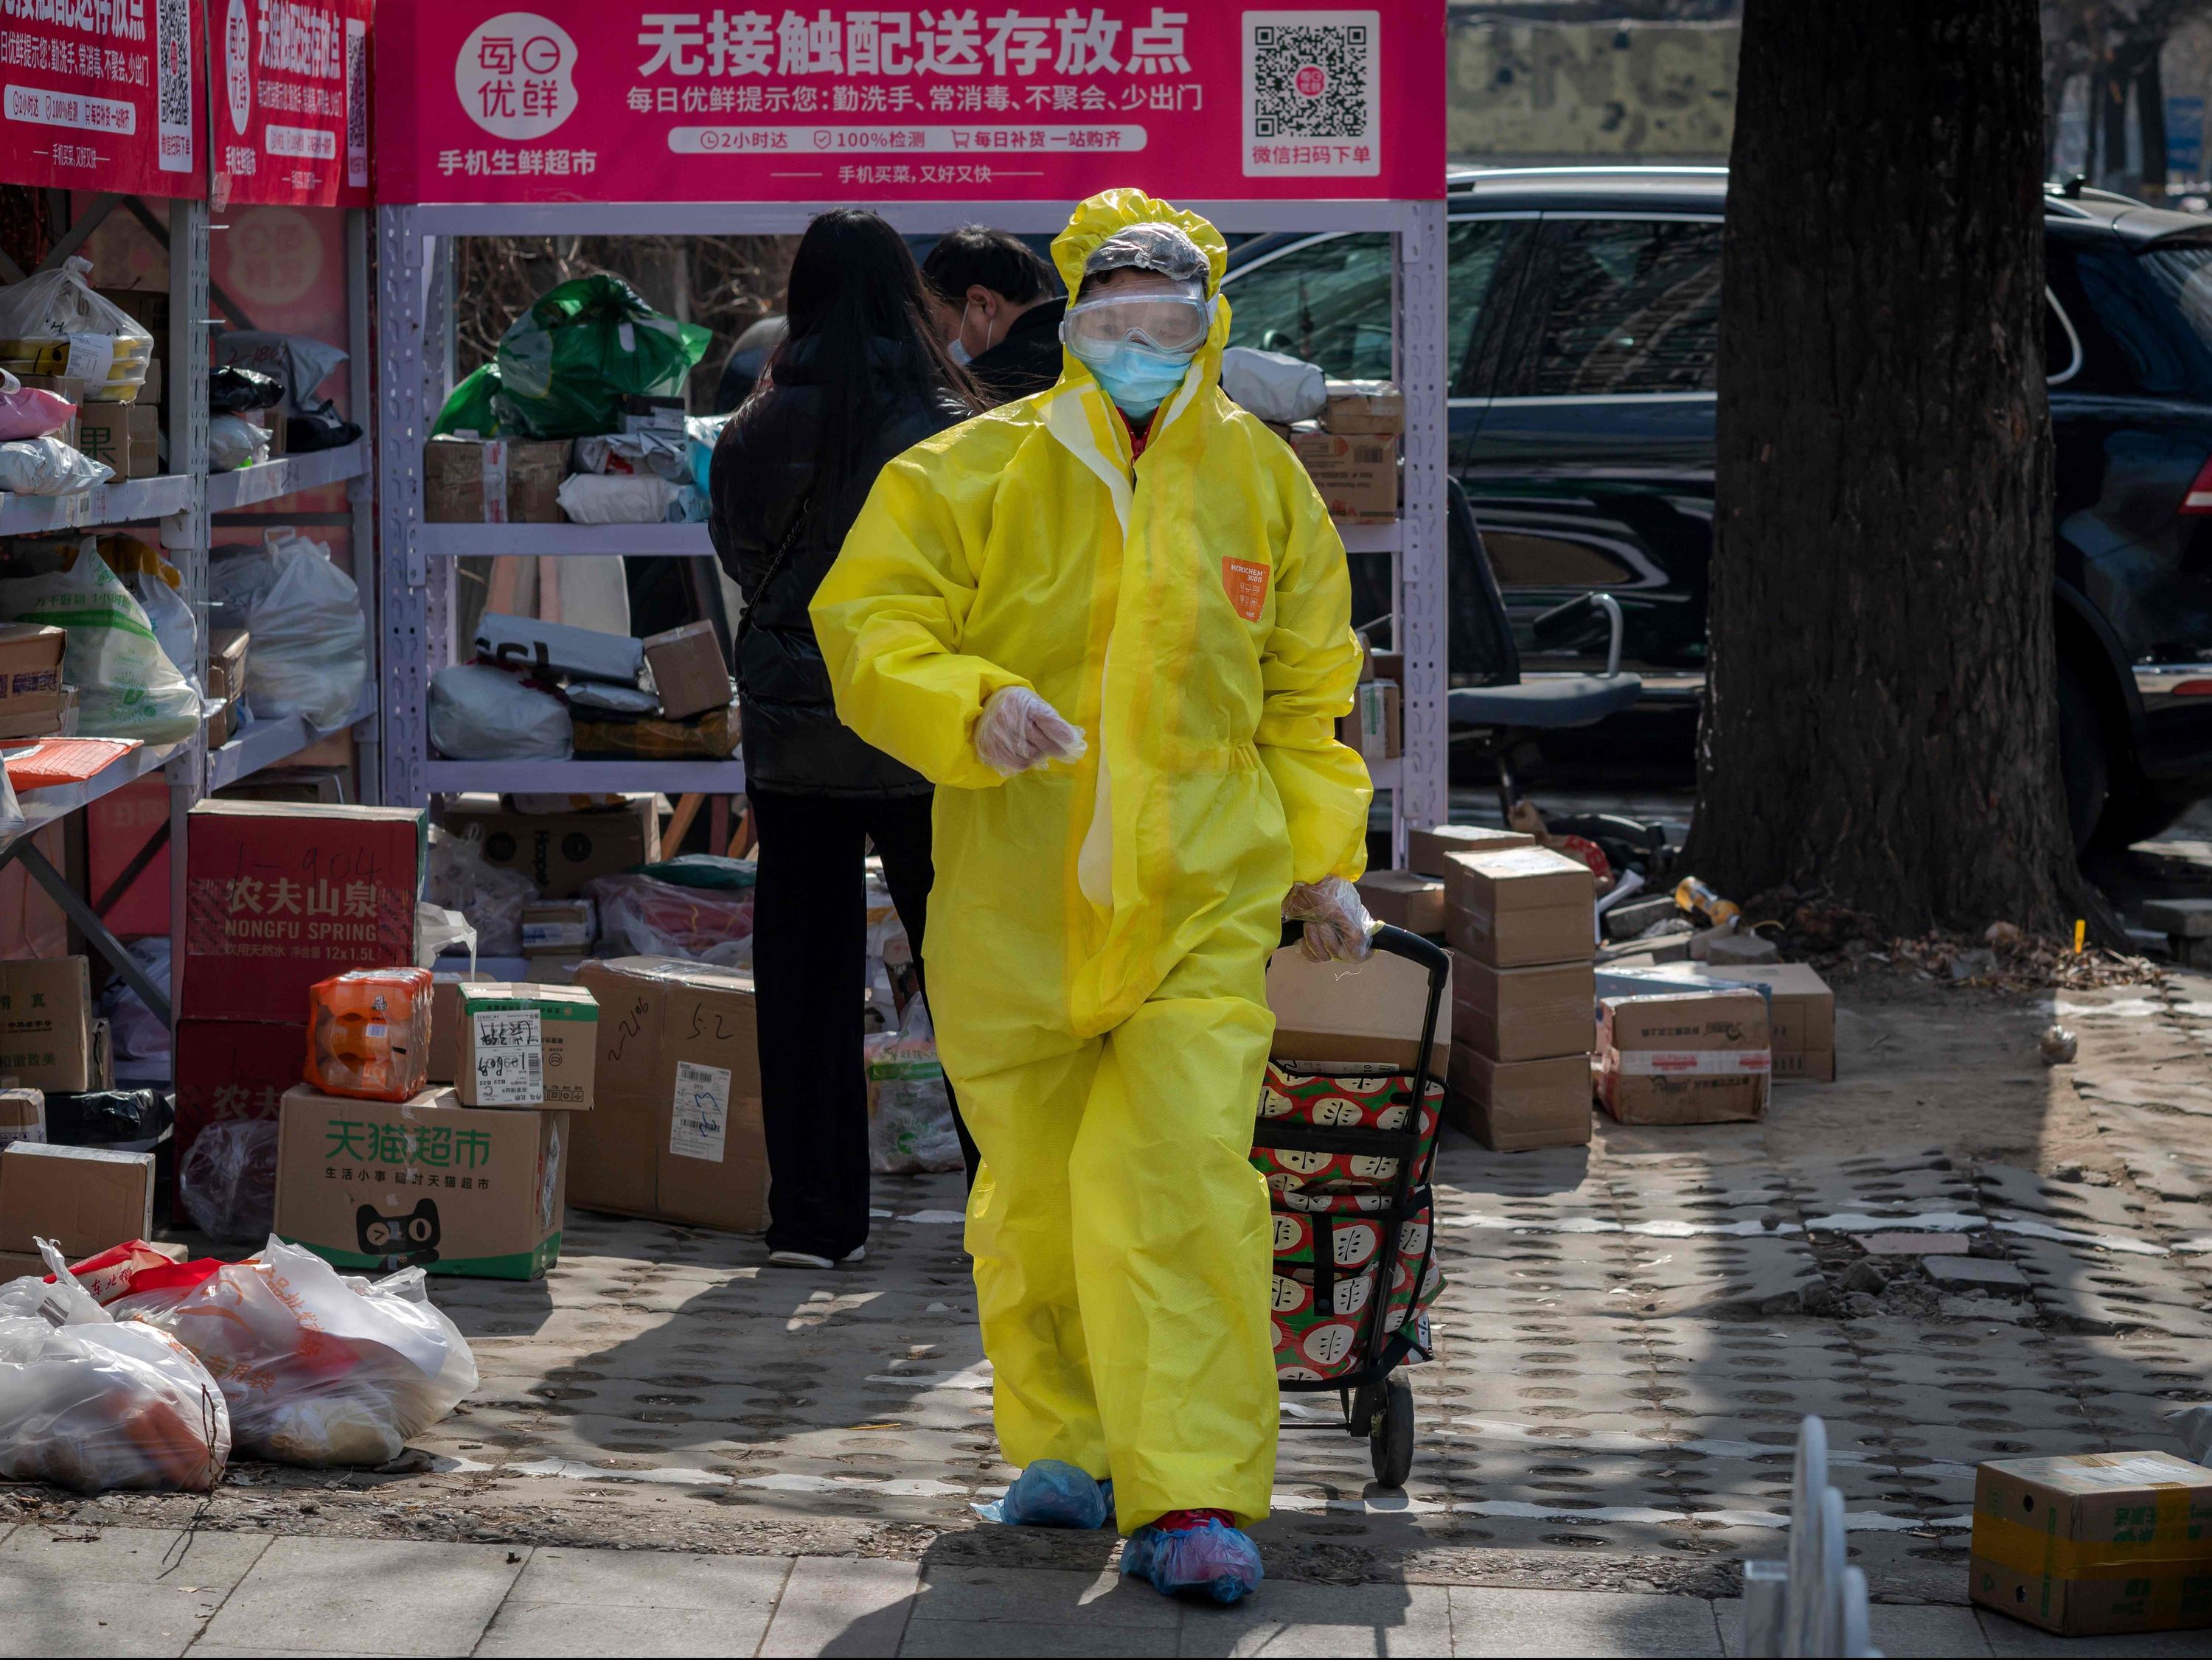  A resident, wearing full protective gear amid fears of the COVID-19 coronavirus, pulls a trolley after collecting packages from a drop-off stall for delivered goods outside a residential compound in Beijing on Feb. 23, 2020.